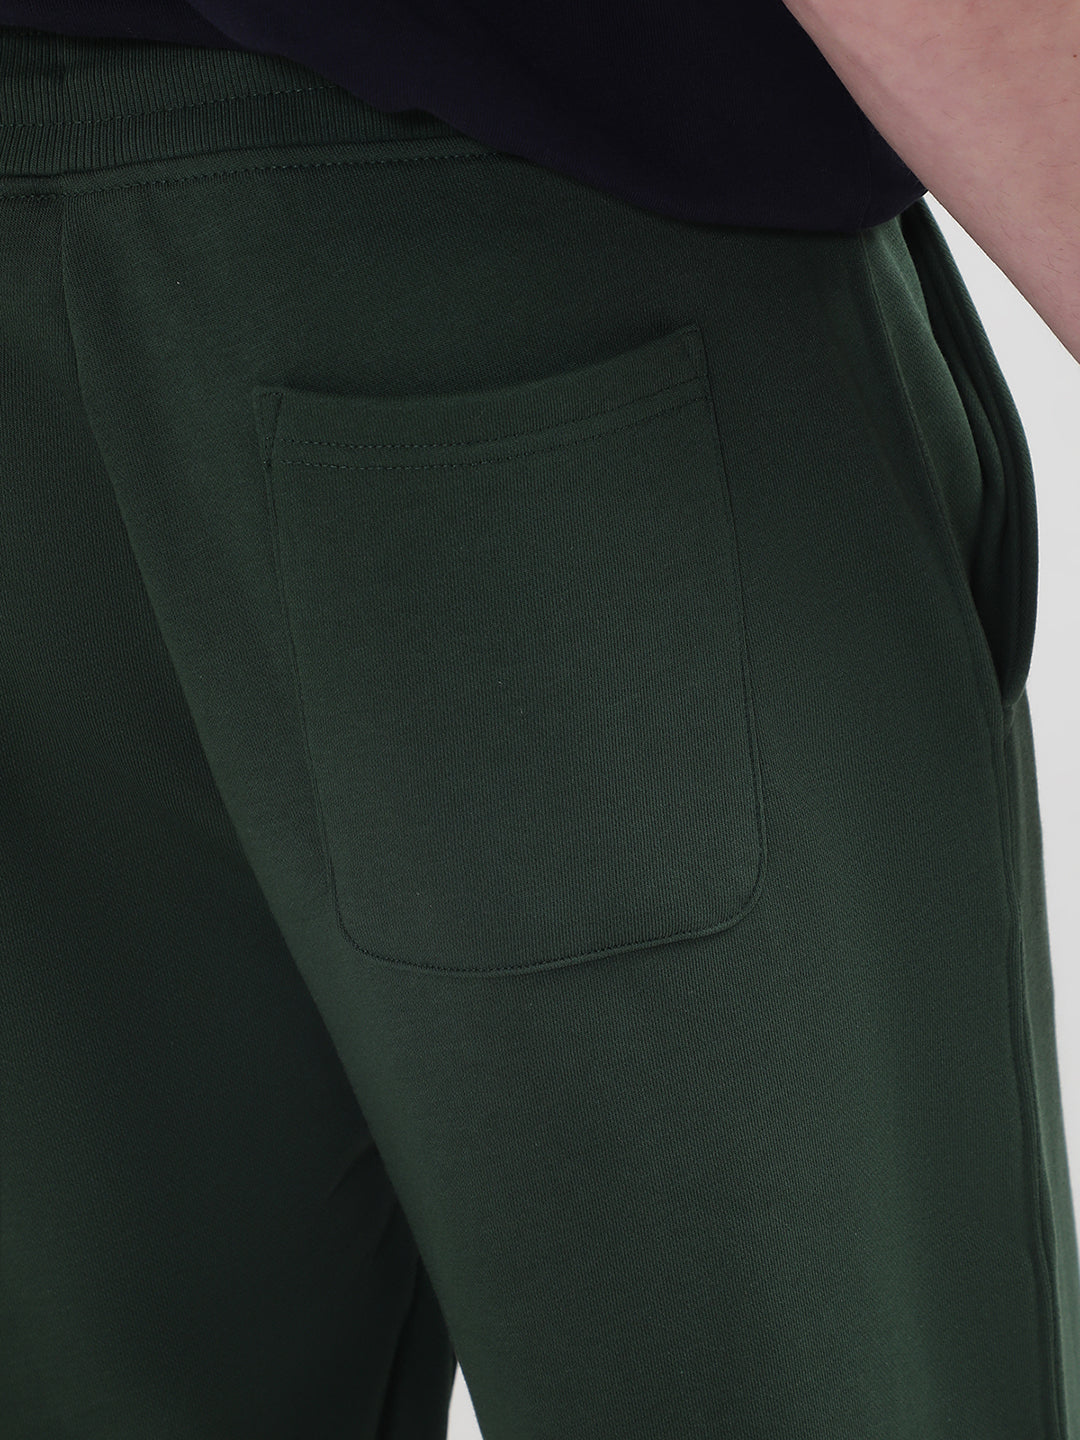 Gant Men Green Solid Relaxed Fit Sweatpant